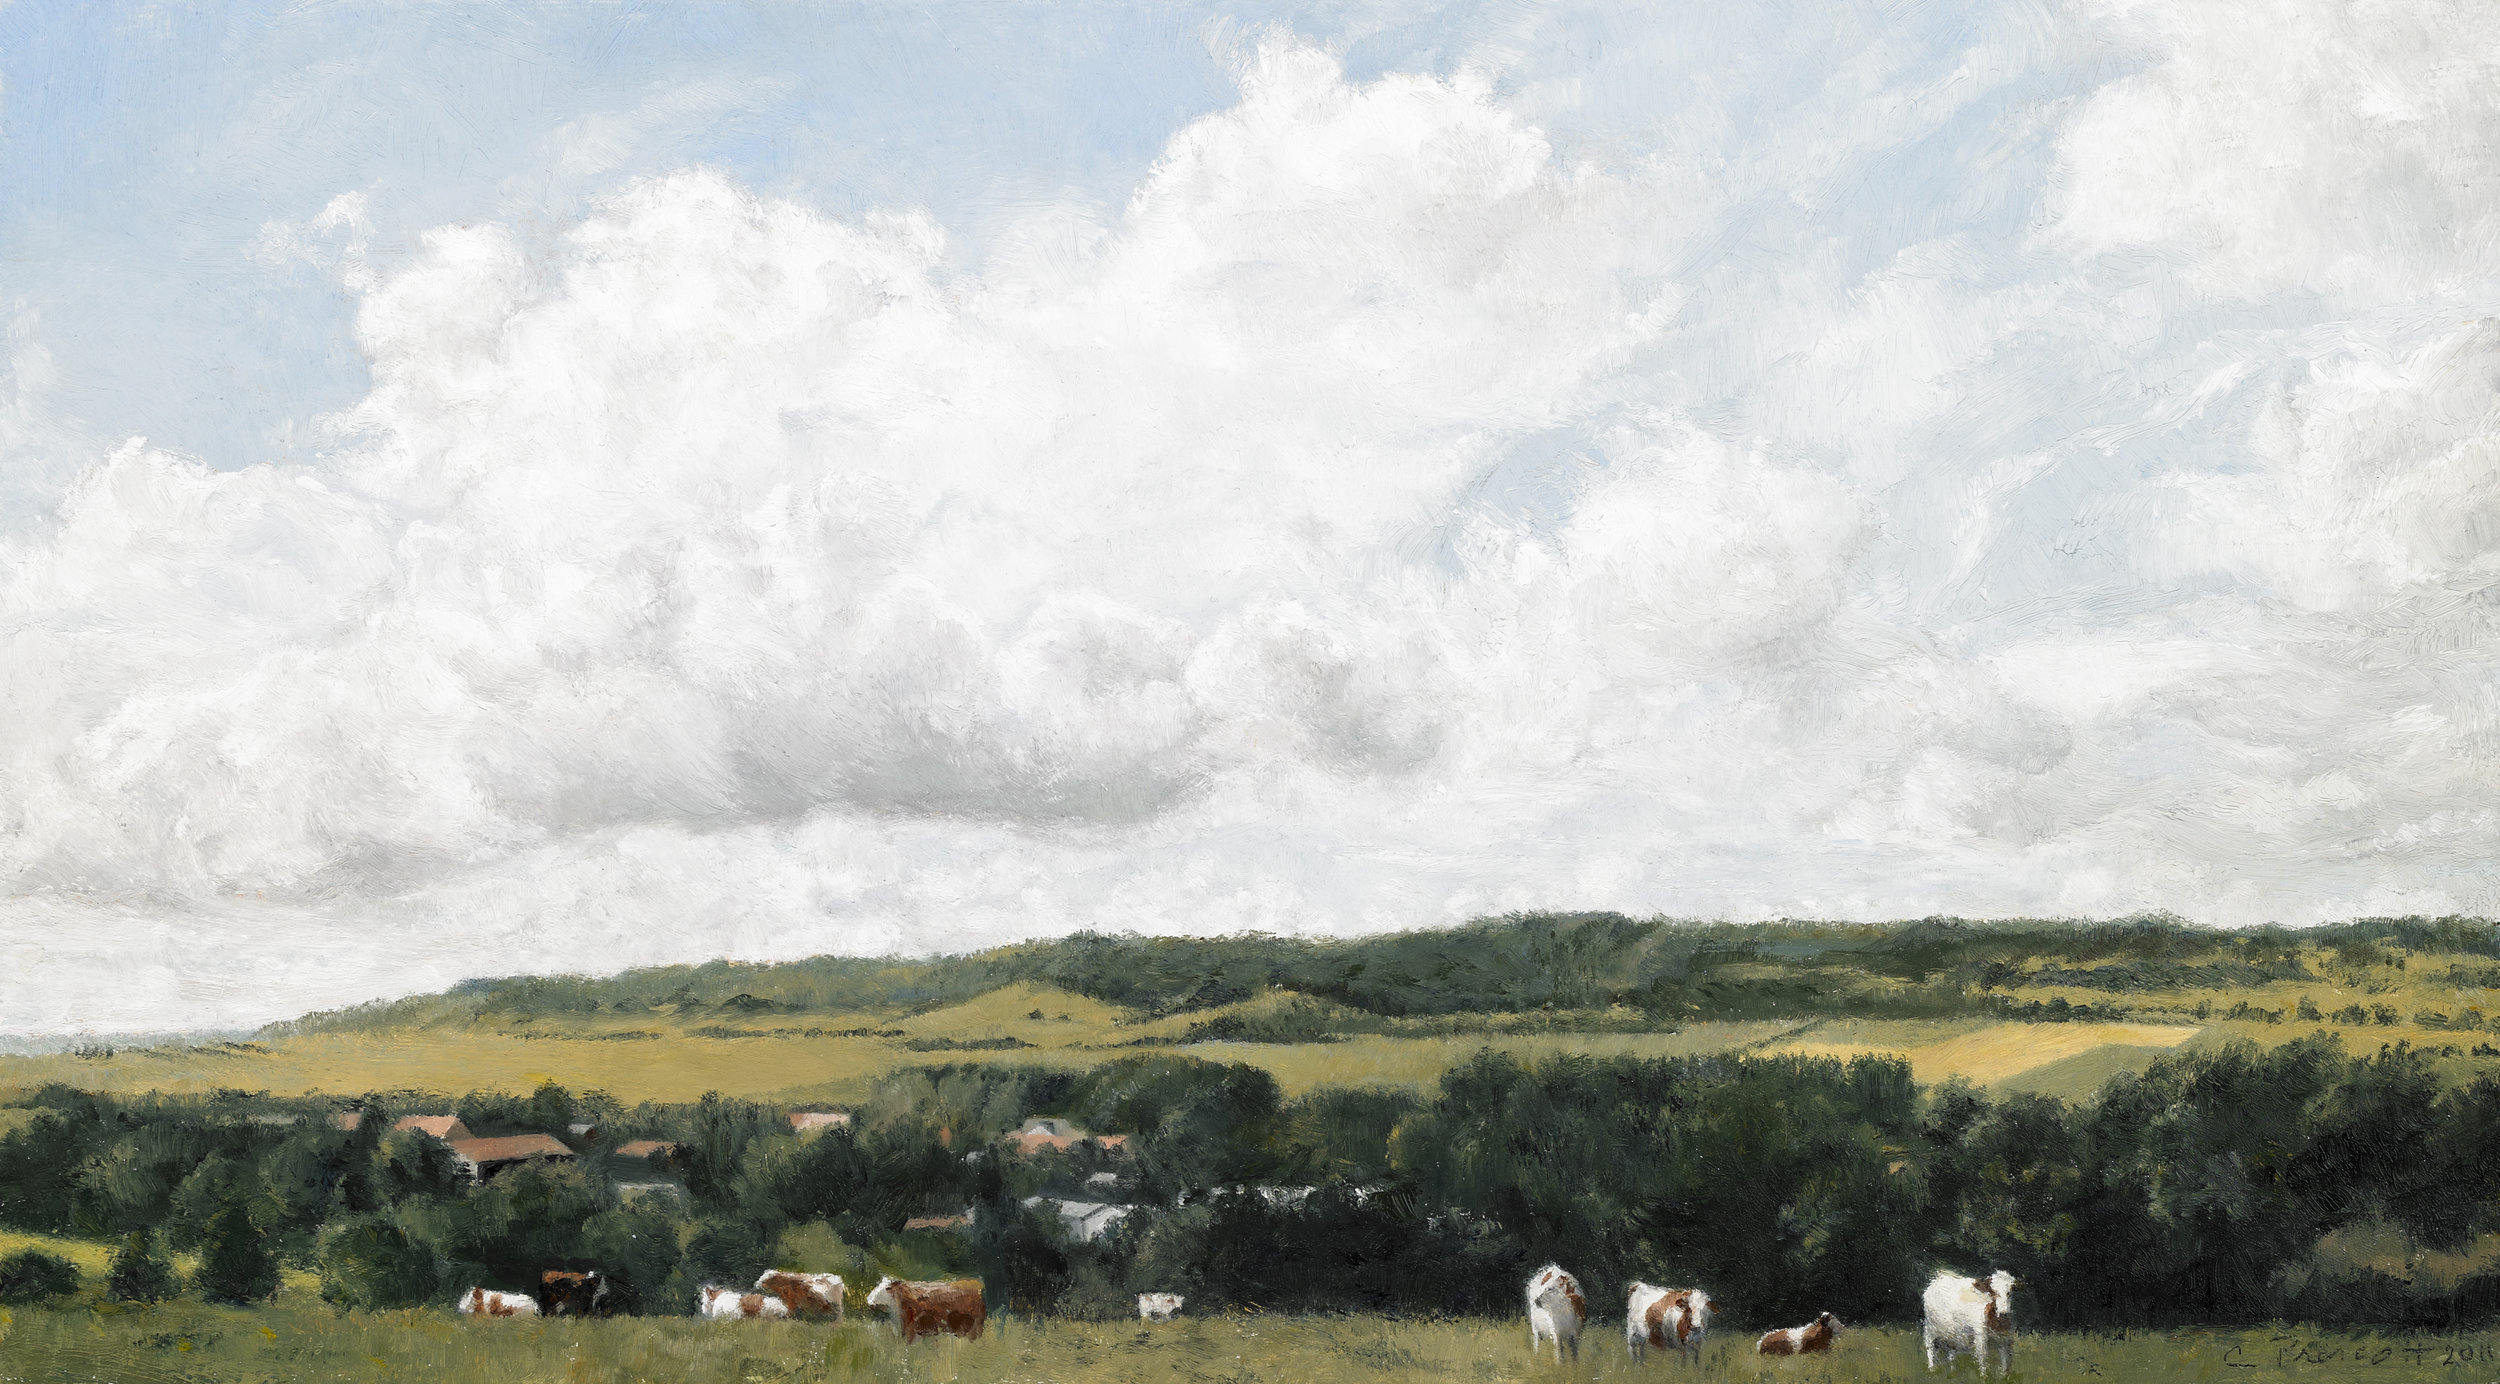   Cows at Home, Bonning, France III , Oil on Wood Panel, 2011, 8" x 14" 